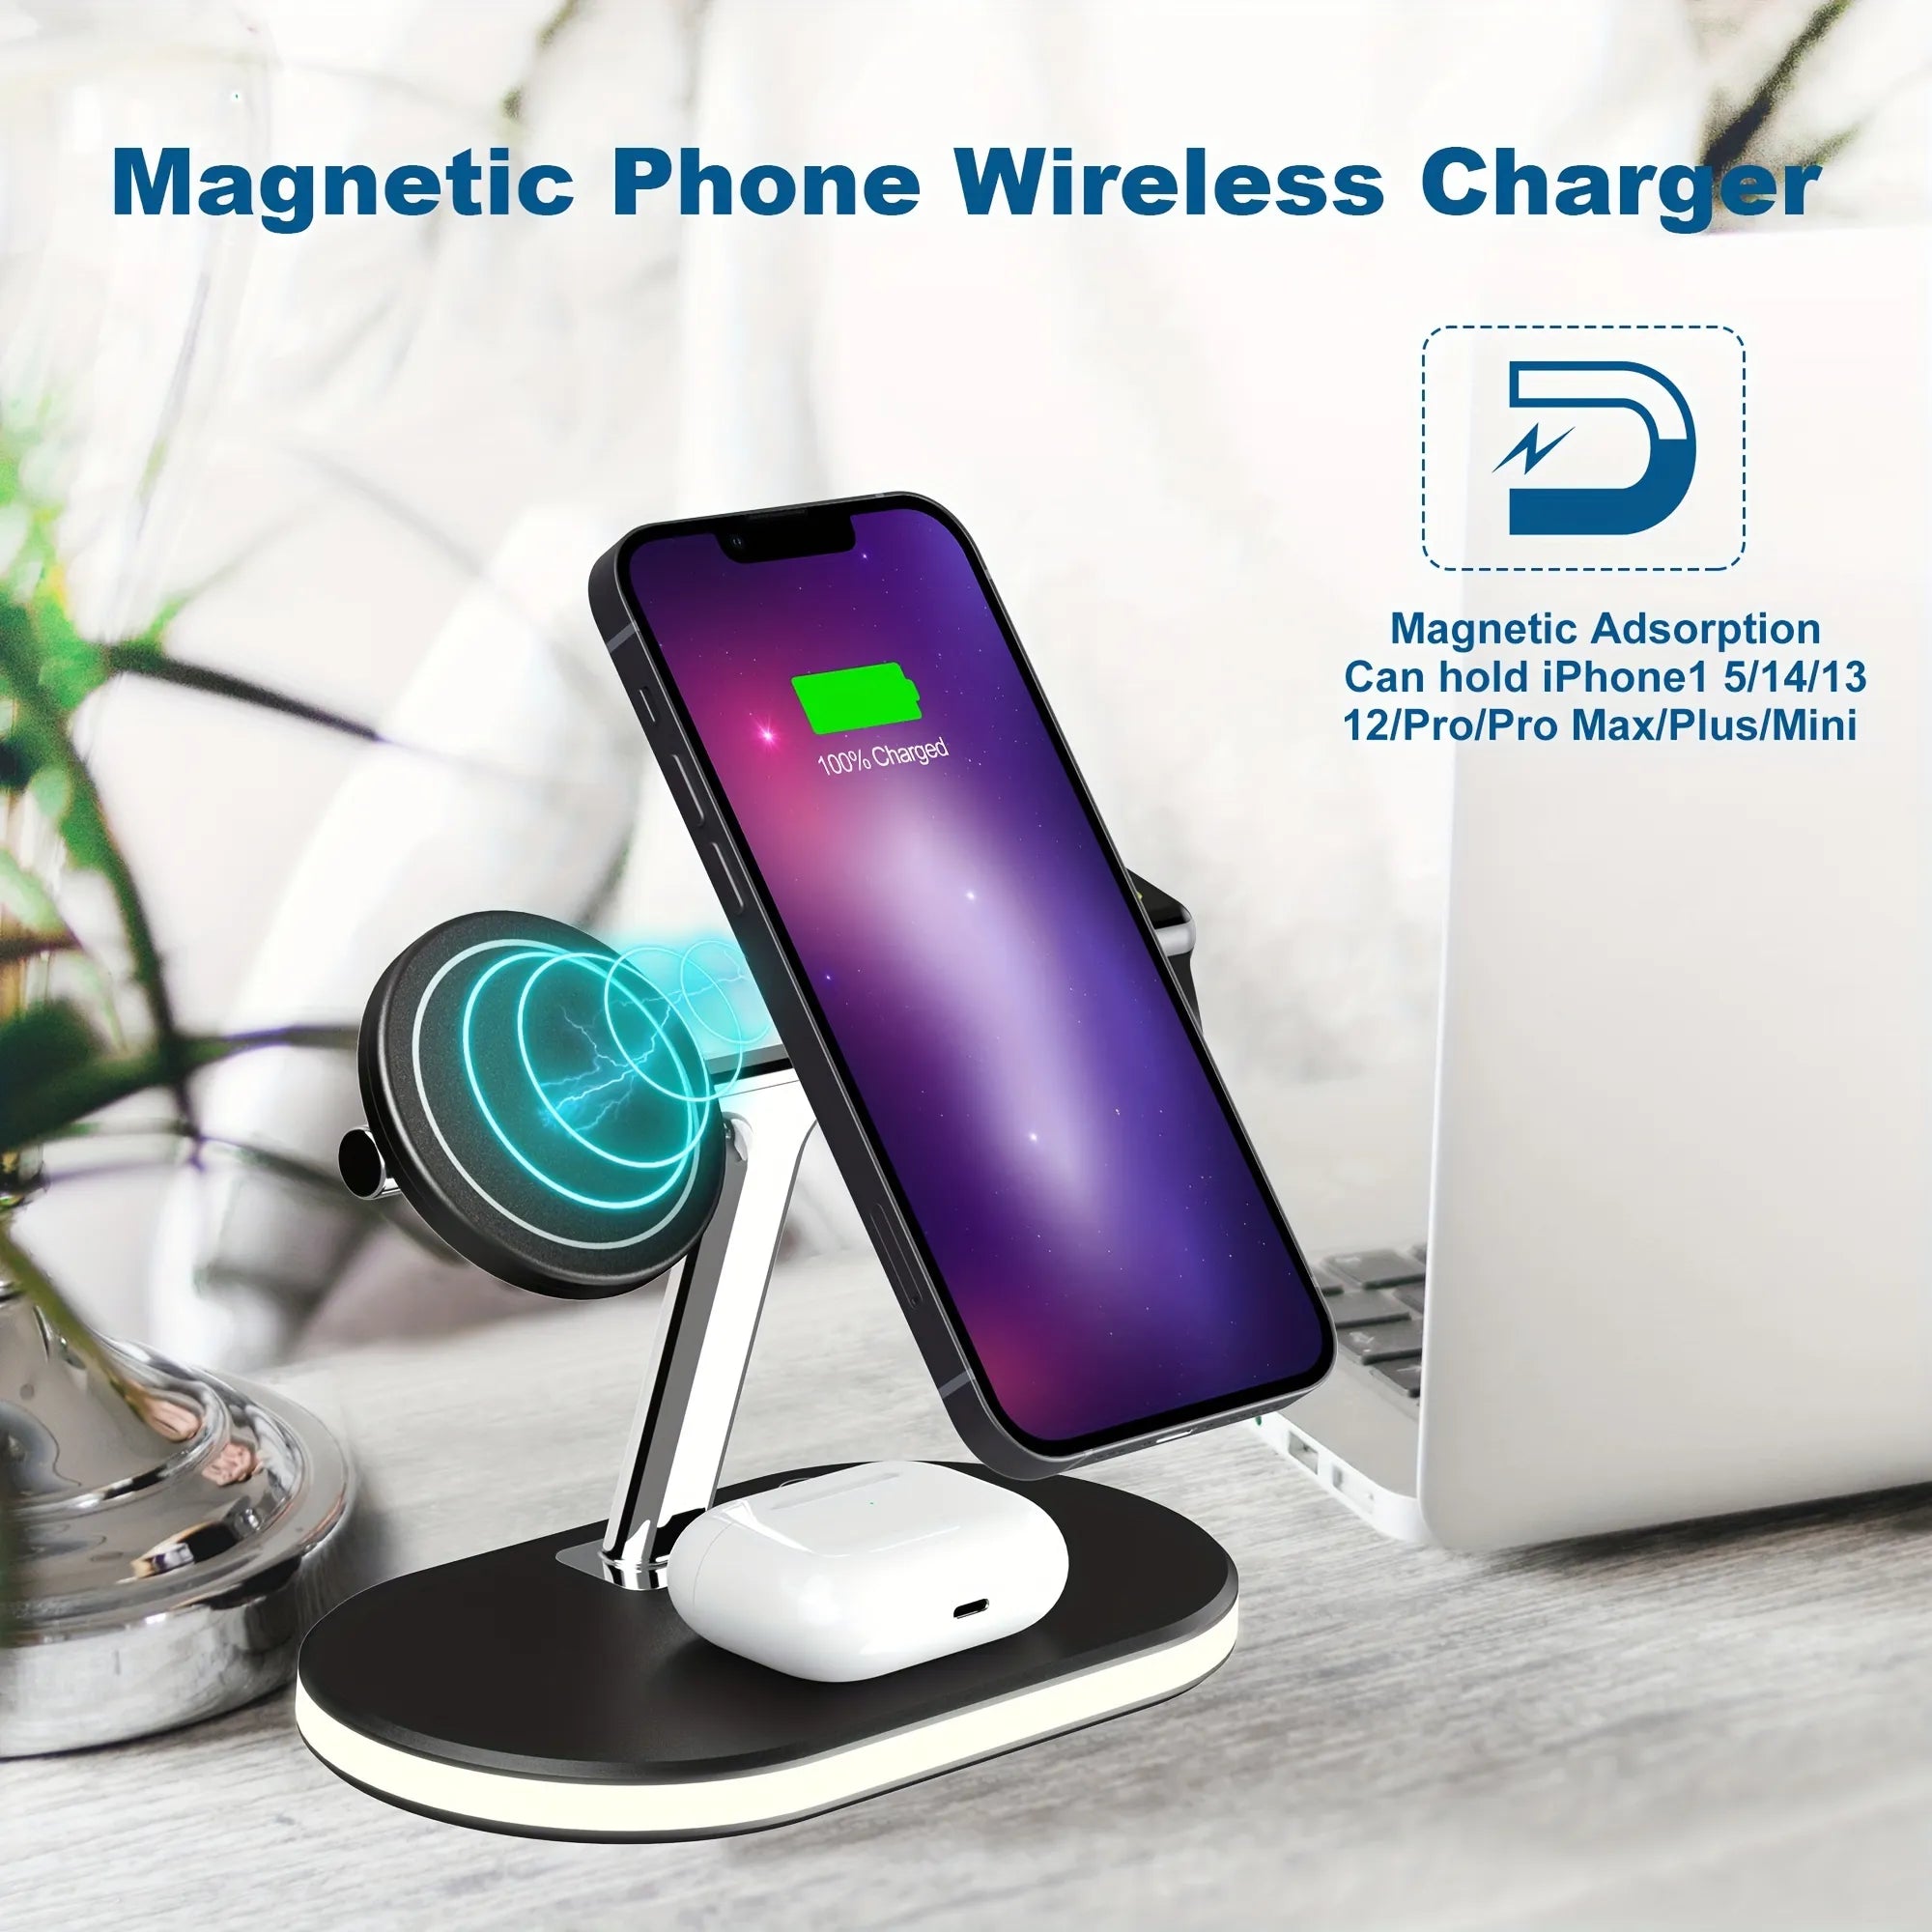 Magnetic Phone Wireless Charger